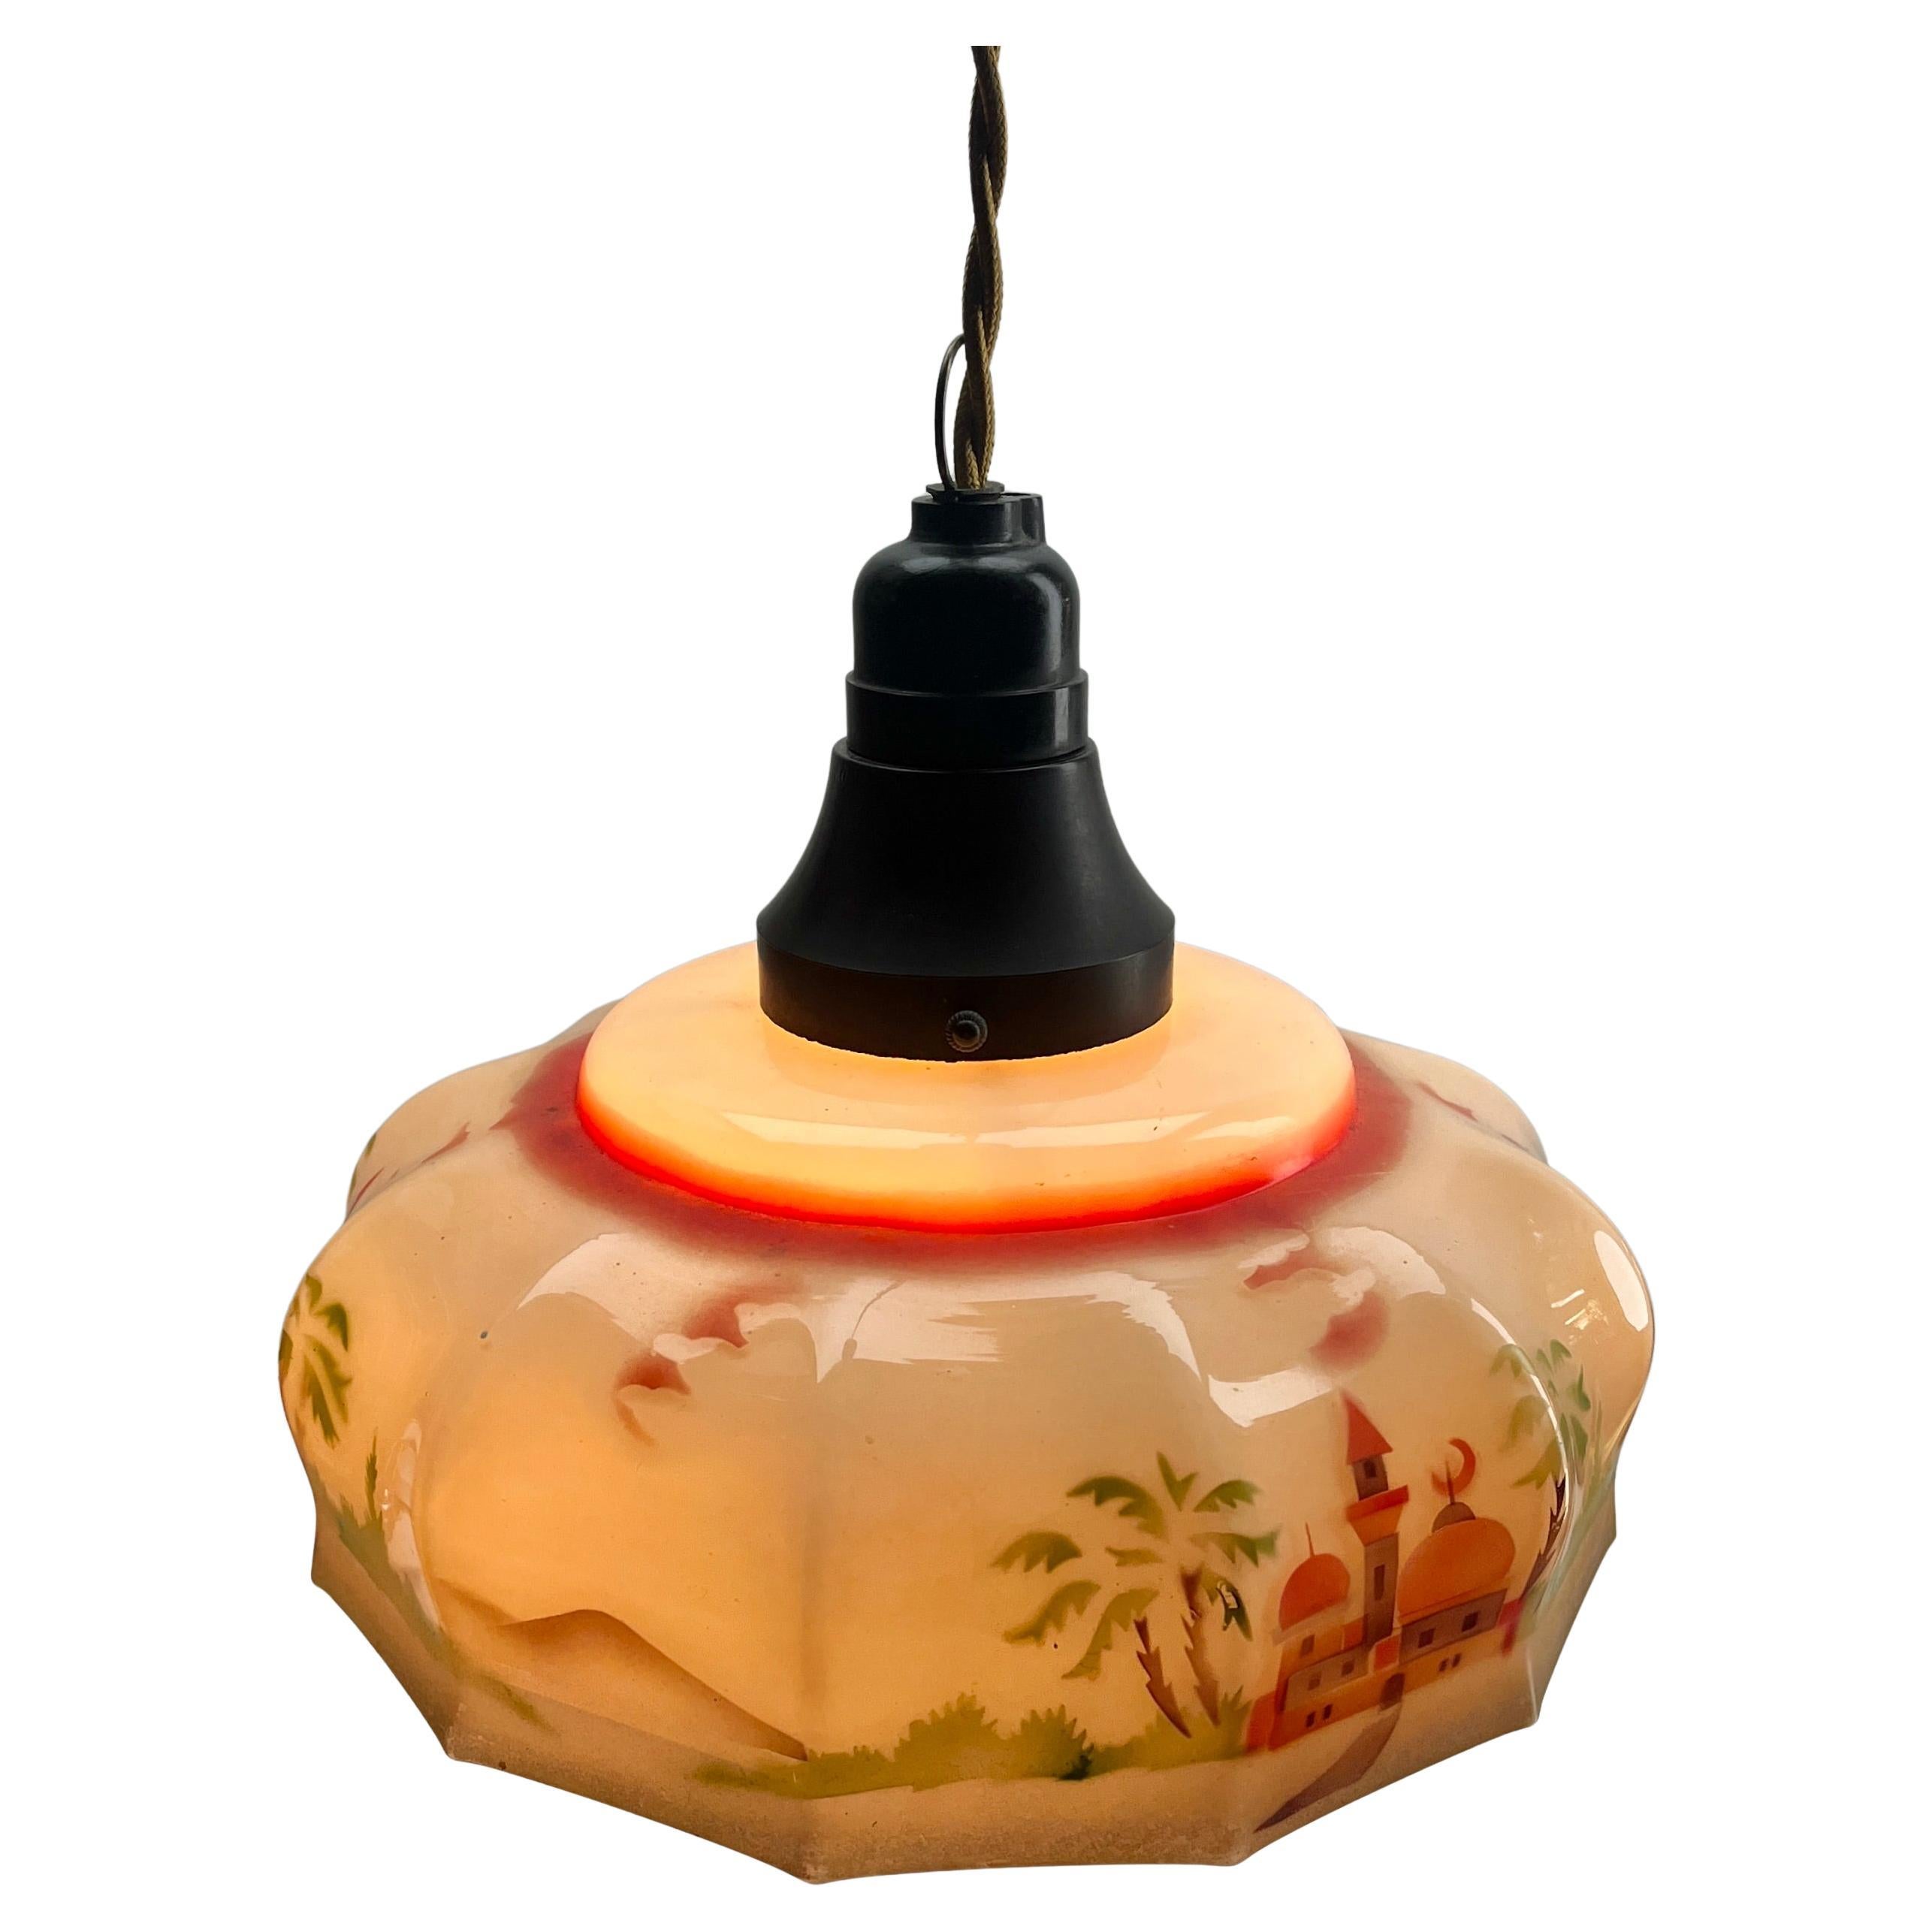 Art Nouveau ceiling lamp
Photography fails to capture the simple elegant illumination provided by this lamp.

Fitting Bakelite pendant ceiling light with screw fixing to hold a stylish Belgian Art Deco lampshade. 
Good distribution of darker and